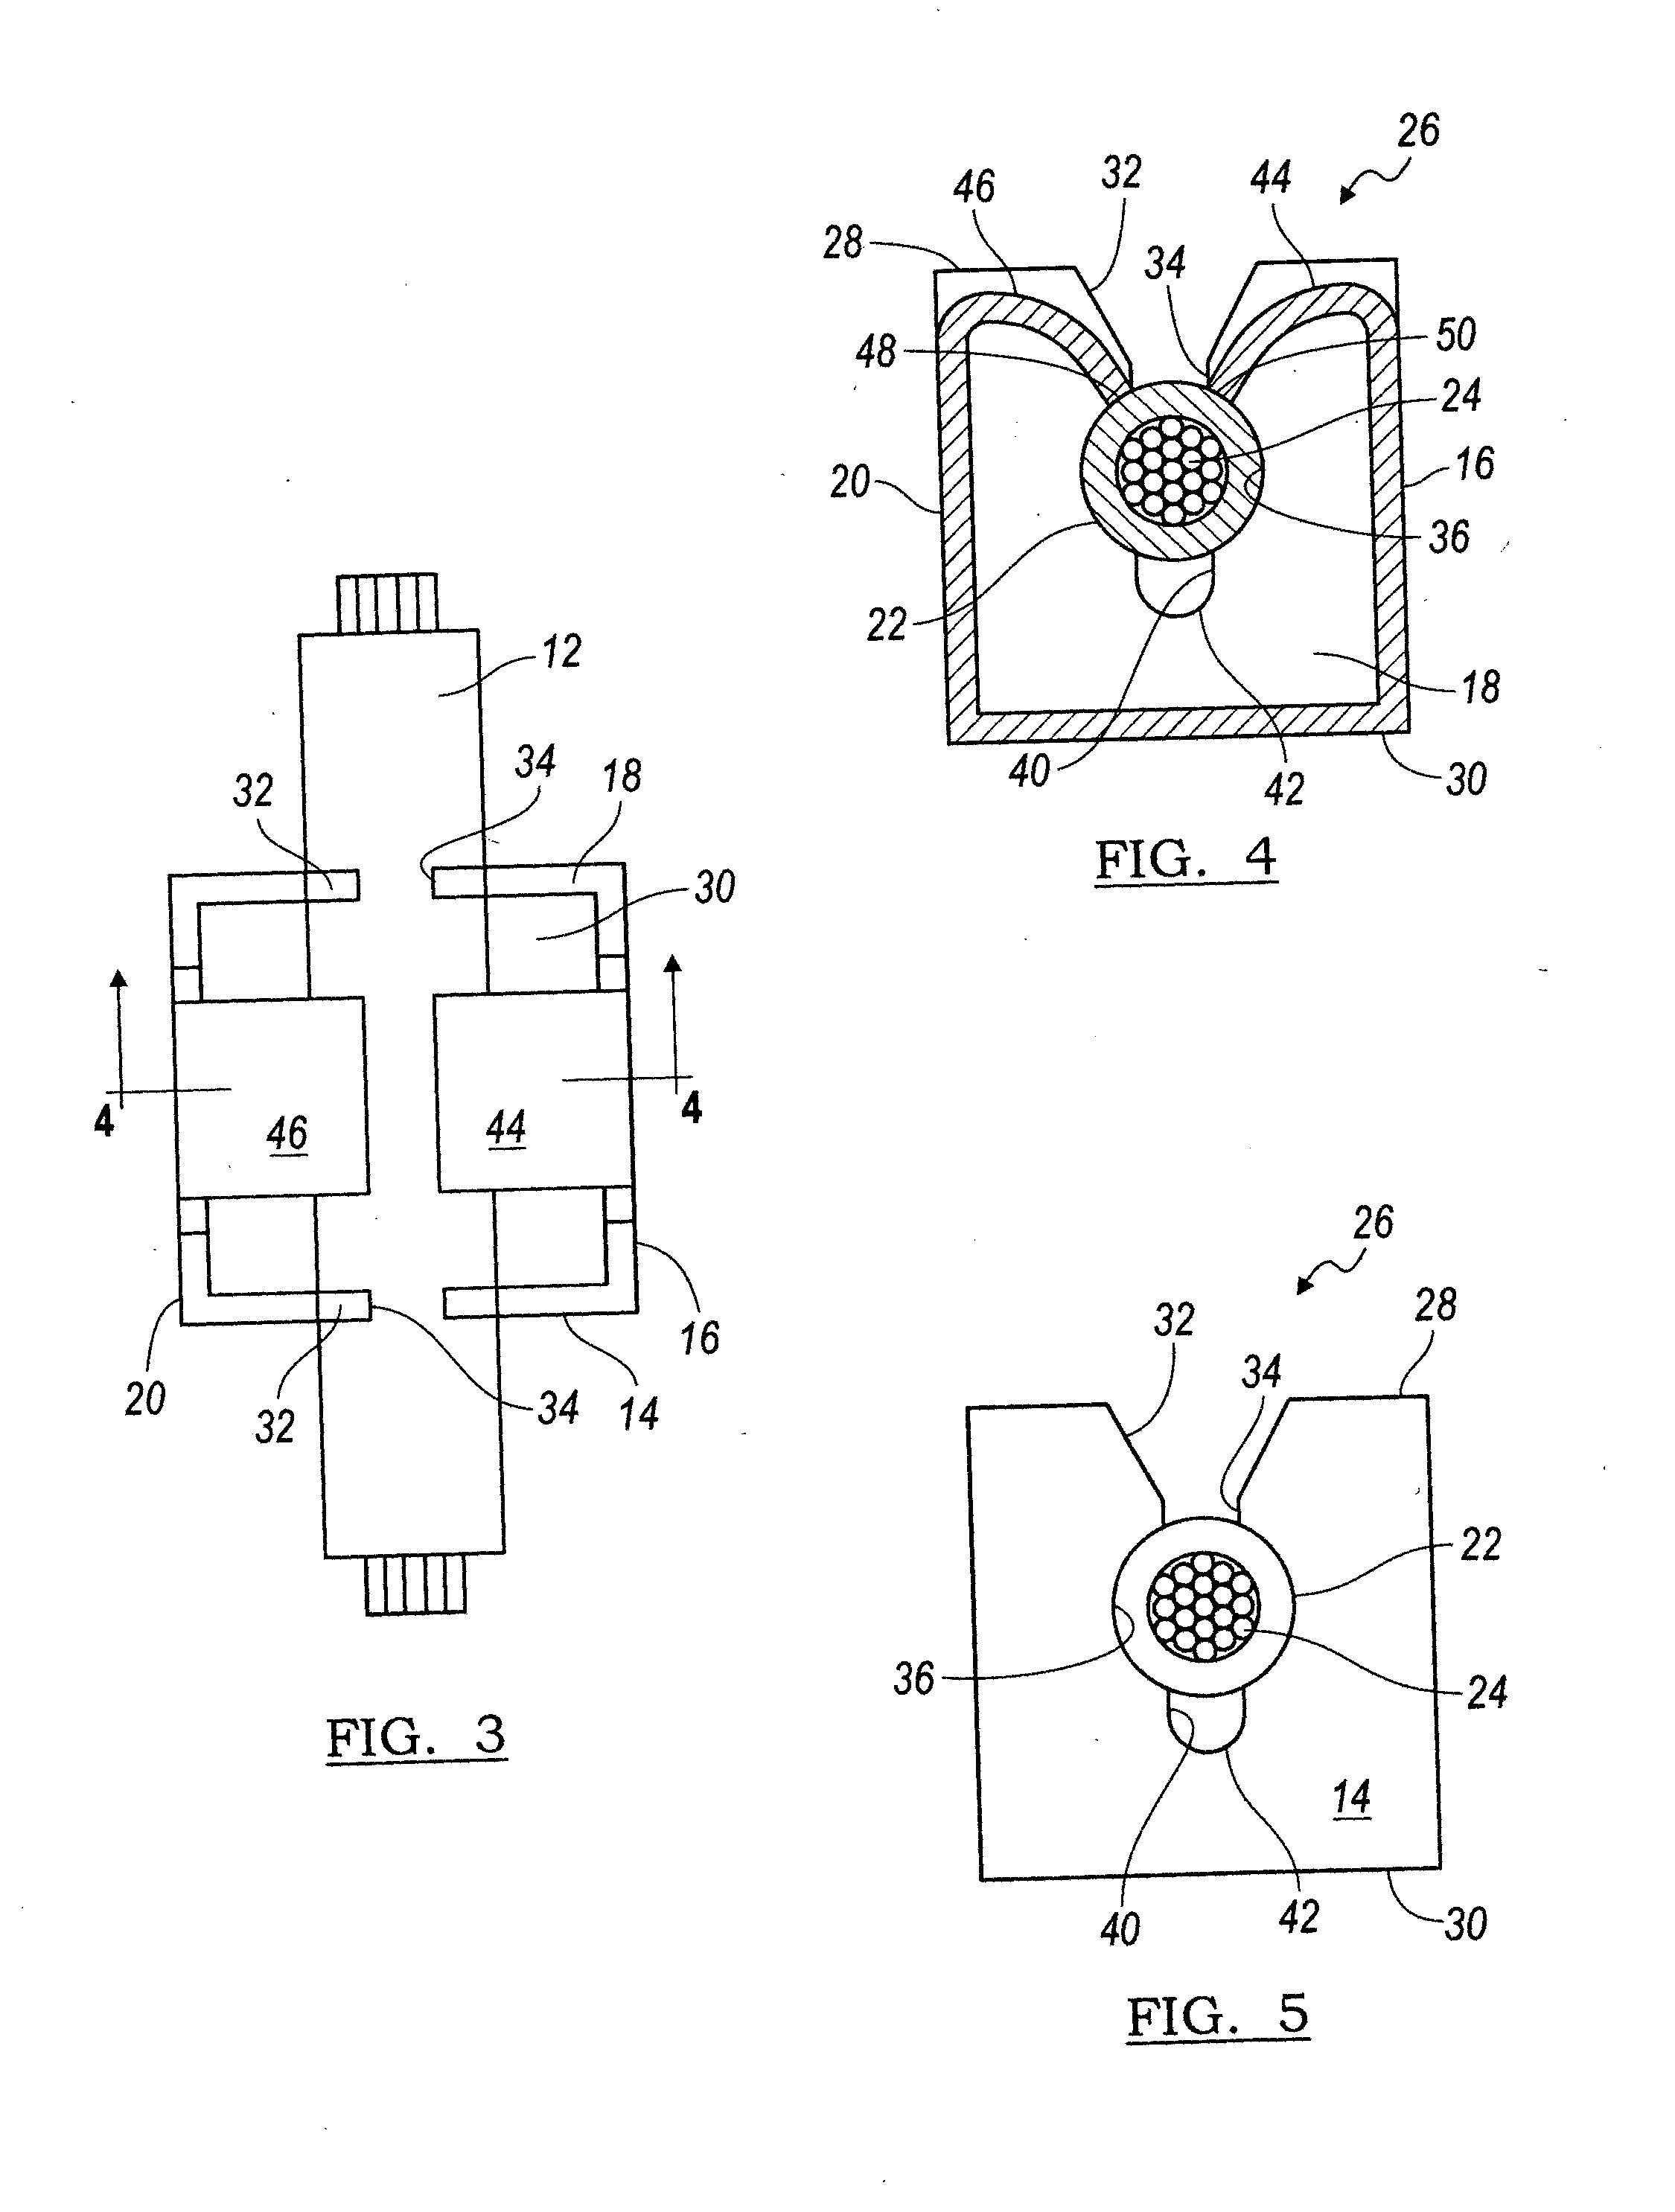 Insulation displacement connection for securing an insulated conductor